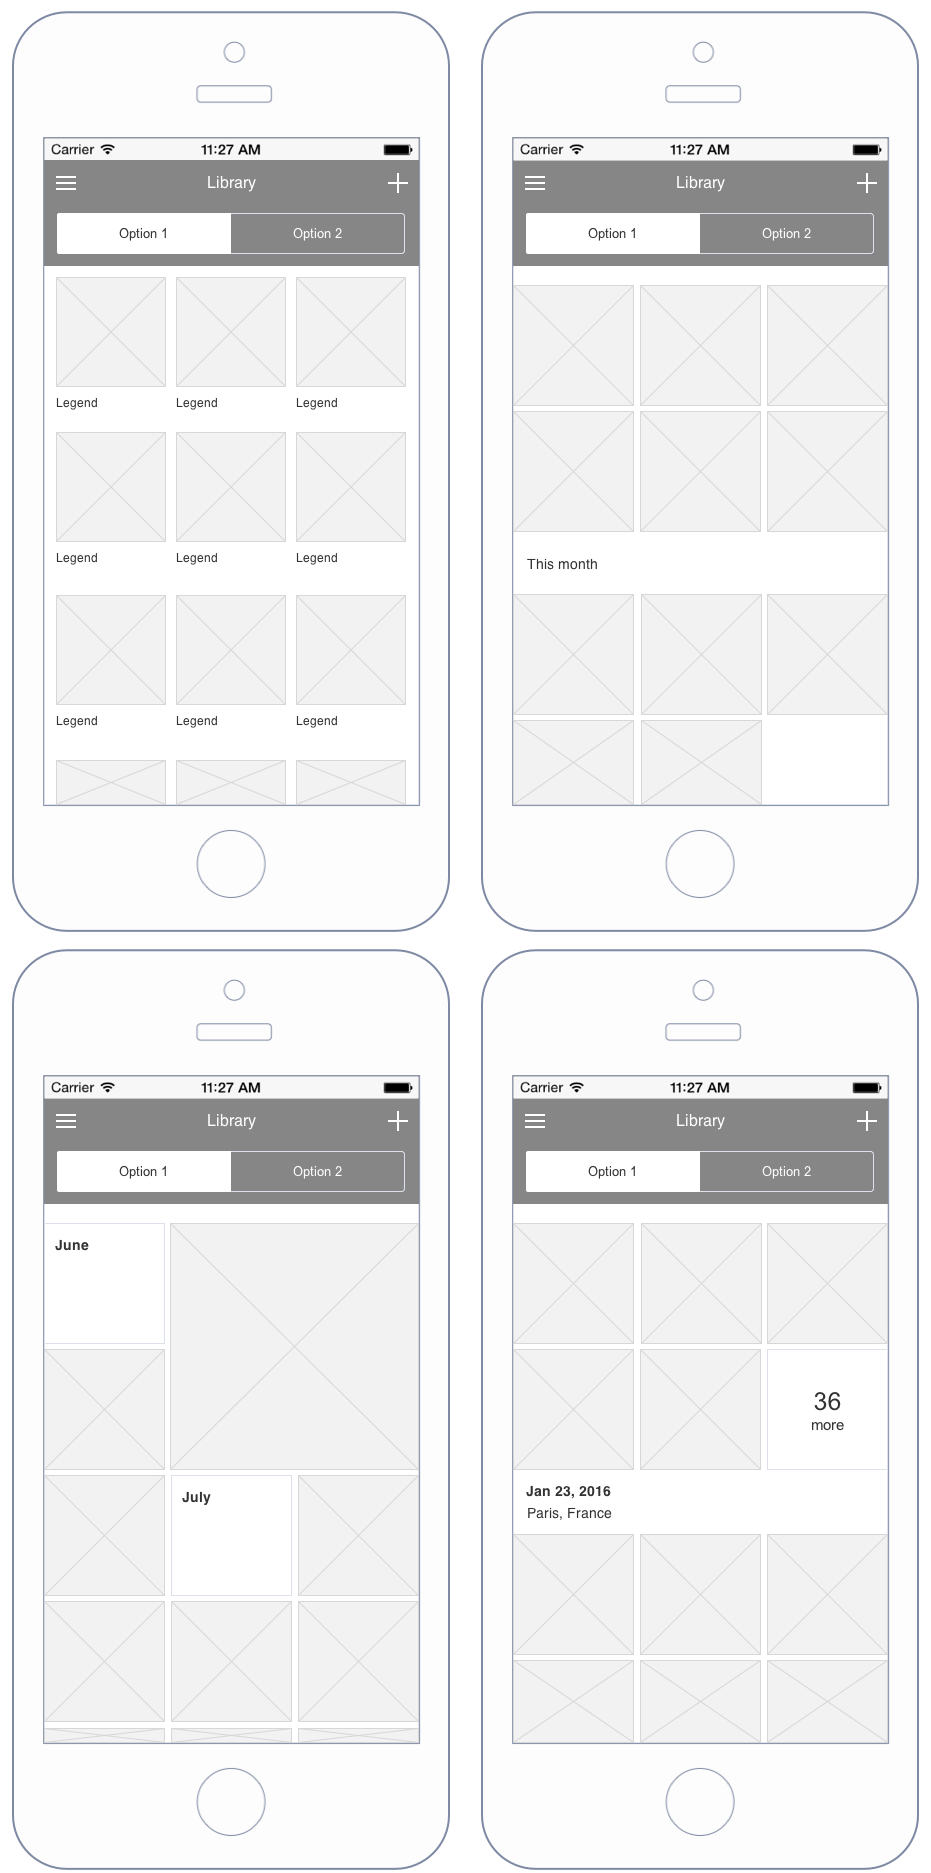 Totalwireframe 原型素材系列之 iPhone Apps Library [for Axure]插图12